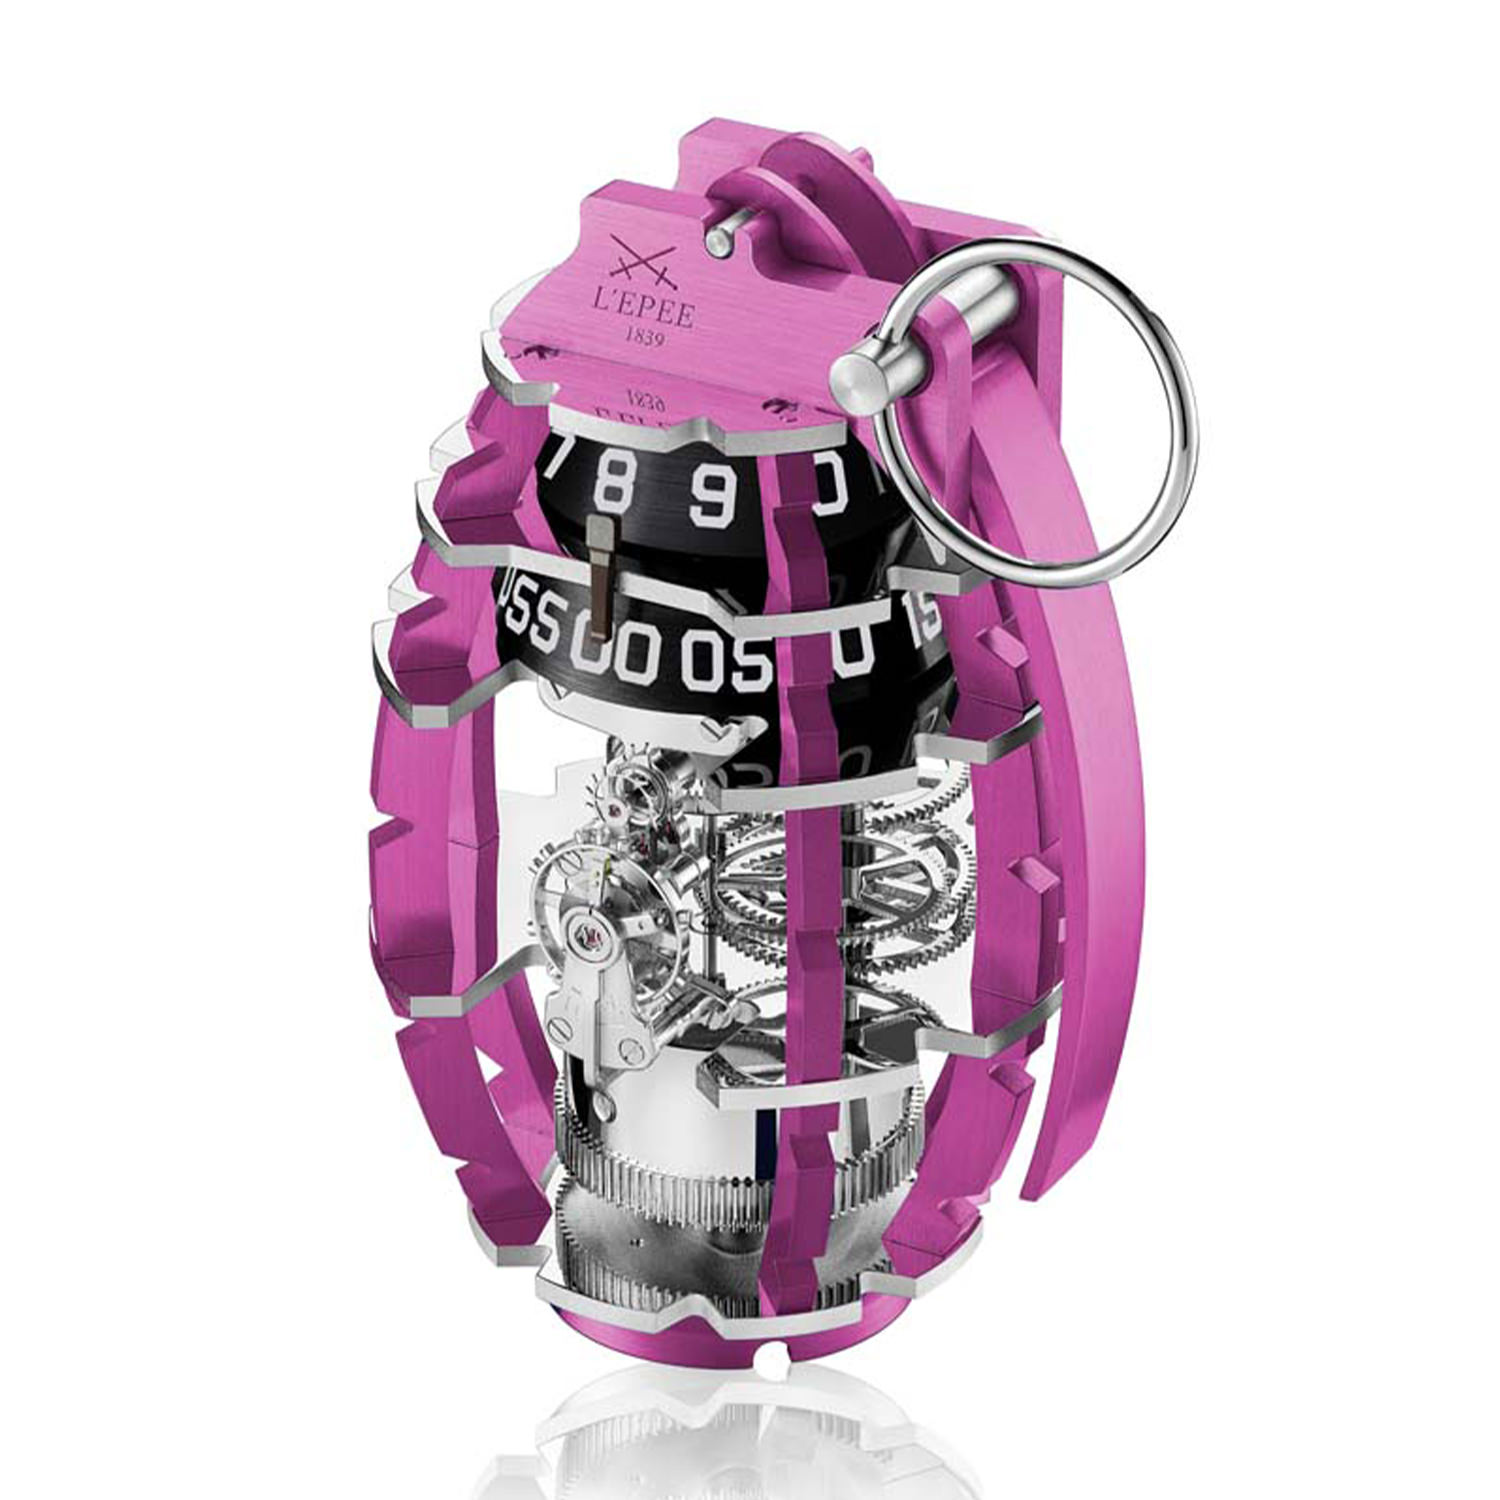 Grenade pink coral reef - L'epee 1839